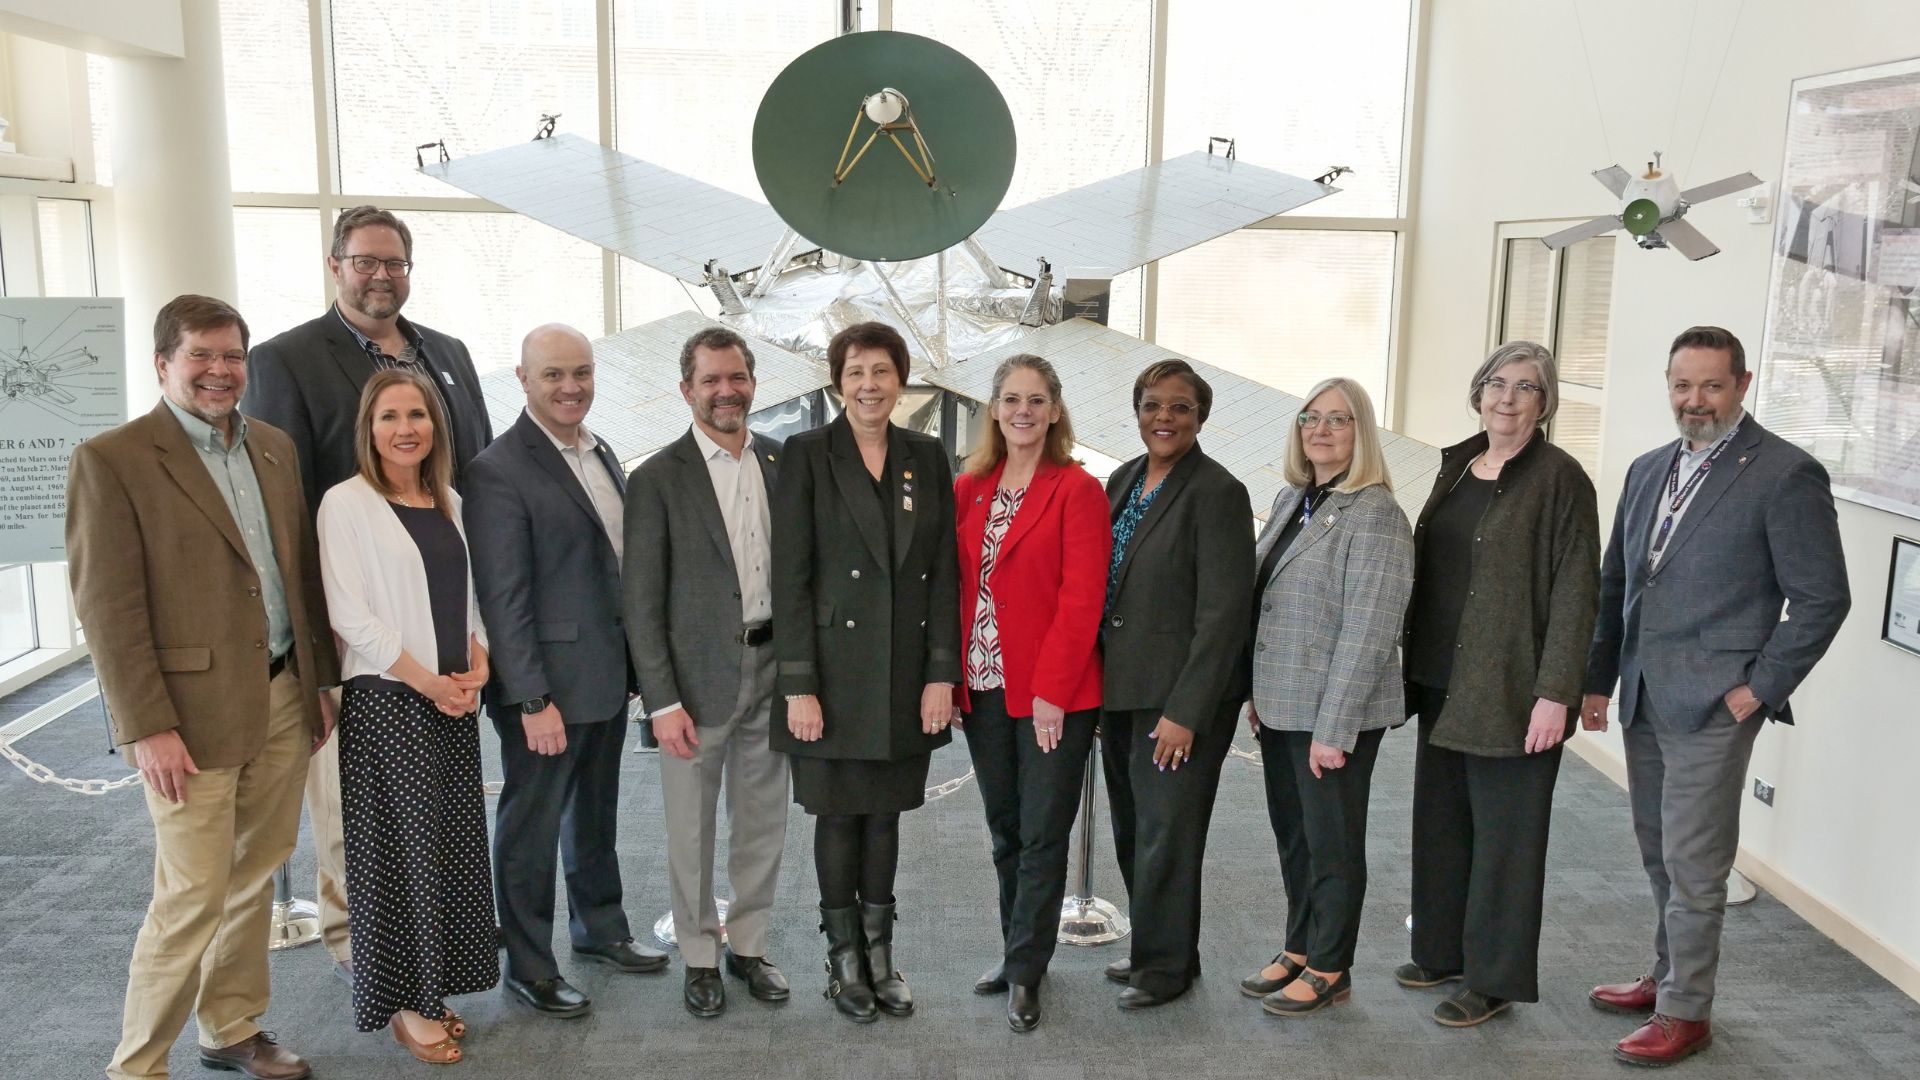 University of Colorado President Todd Saliman and LASP officials met with Nicola Fox, associate administrator for NASA's Science Mission Directorate, and her SMD colleagues. Seen here in front of the Mariner spacecraft displayed in LASP's lobby are (from left to right): Carl Gelderloos and Frank Eparvier of LASP; Danielle Radovich Piper, Massimo Ruzzene and Todd Saliman of CU; Nicky Fox, Sandra Connelly, and Wanda Peters of NASA; Pam Millar of LASP; Carolyn Mercer of NASA; and Stephen Ettinger of LASP. Credit: Casey A. Cass/University of Colorado/LASP